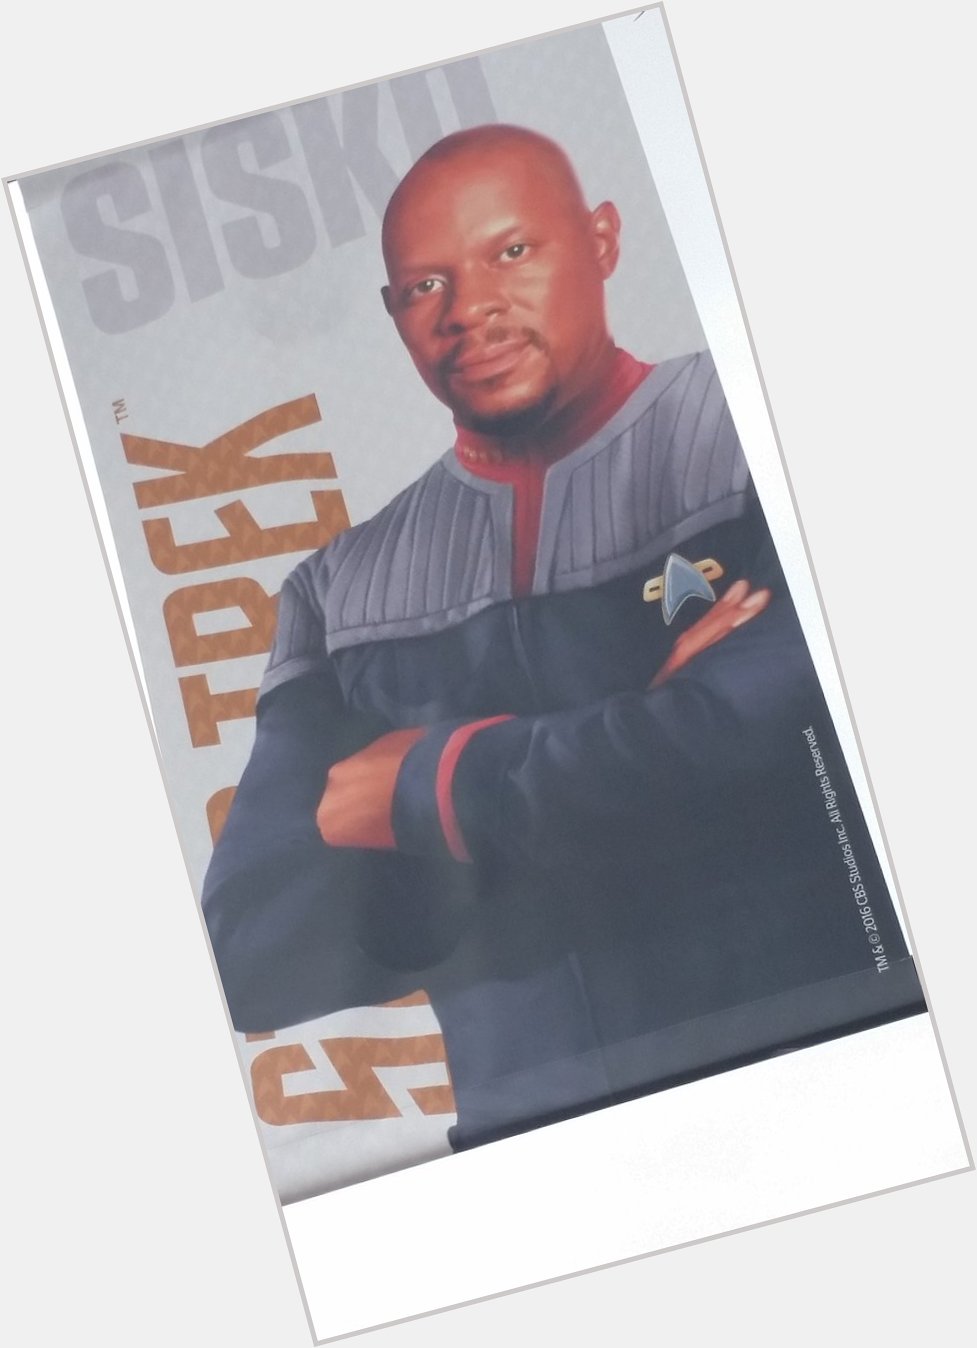 A very happy birthday to Avery Brooks!  Captain and Emissary  (as well as once being a Man called Hawk) 